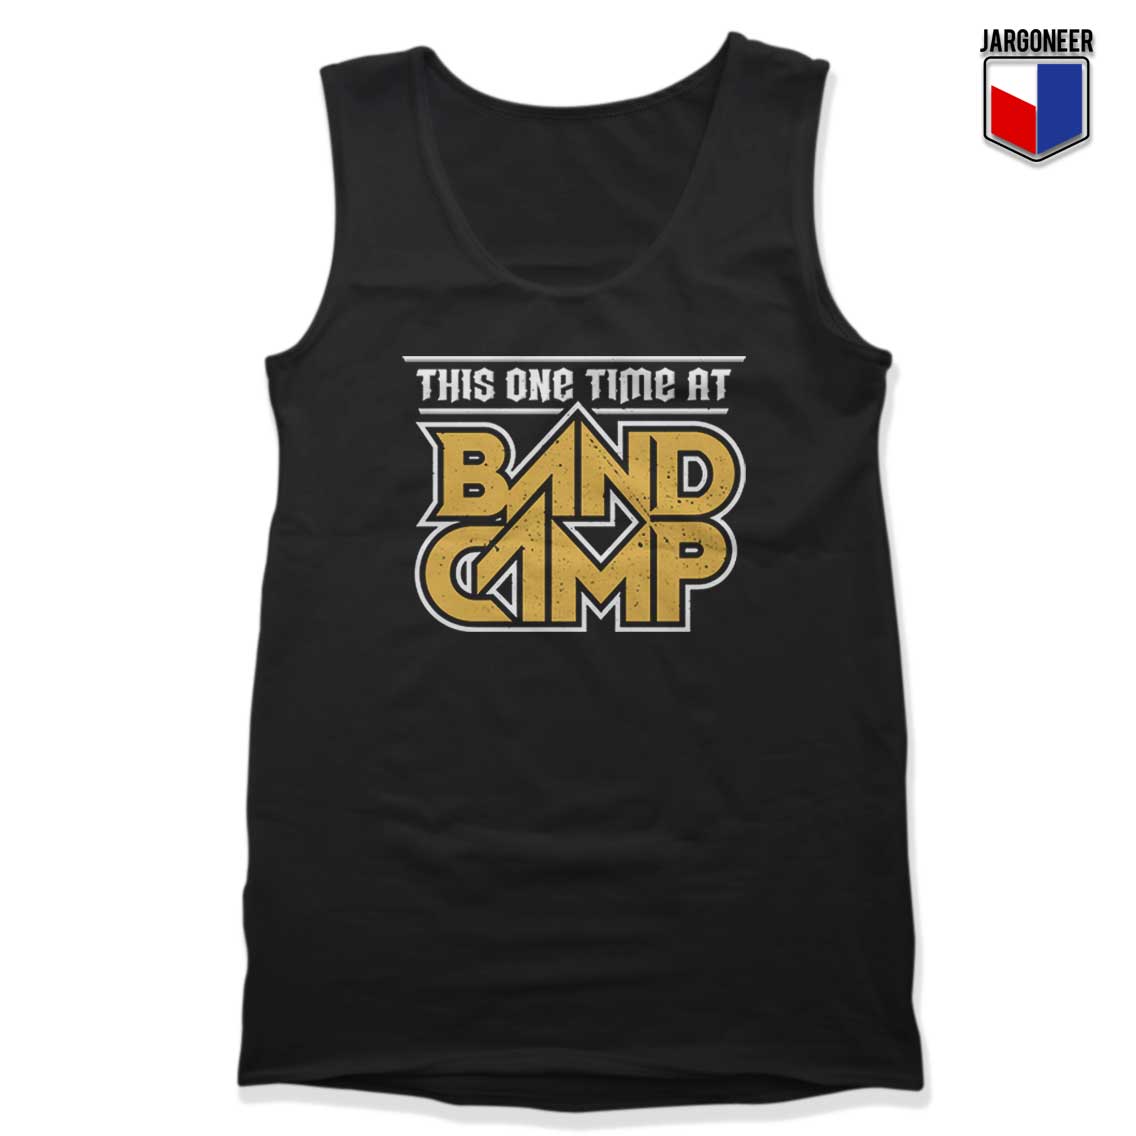 This One Time At Band Camp Tank Top - Shop Unique Graphic Cool Shirt Designs